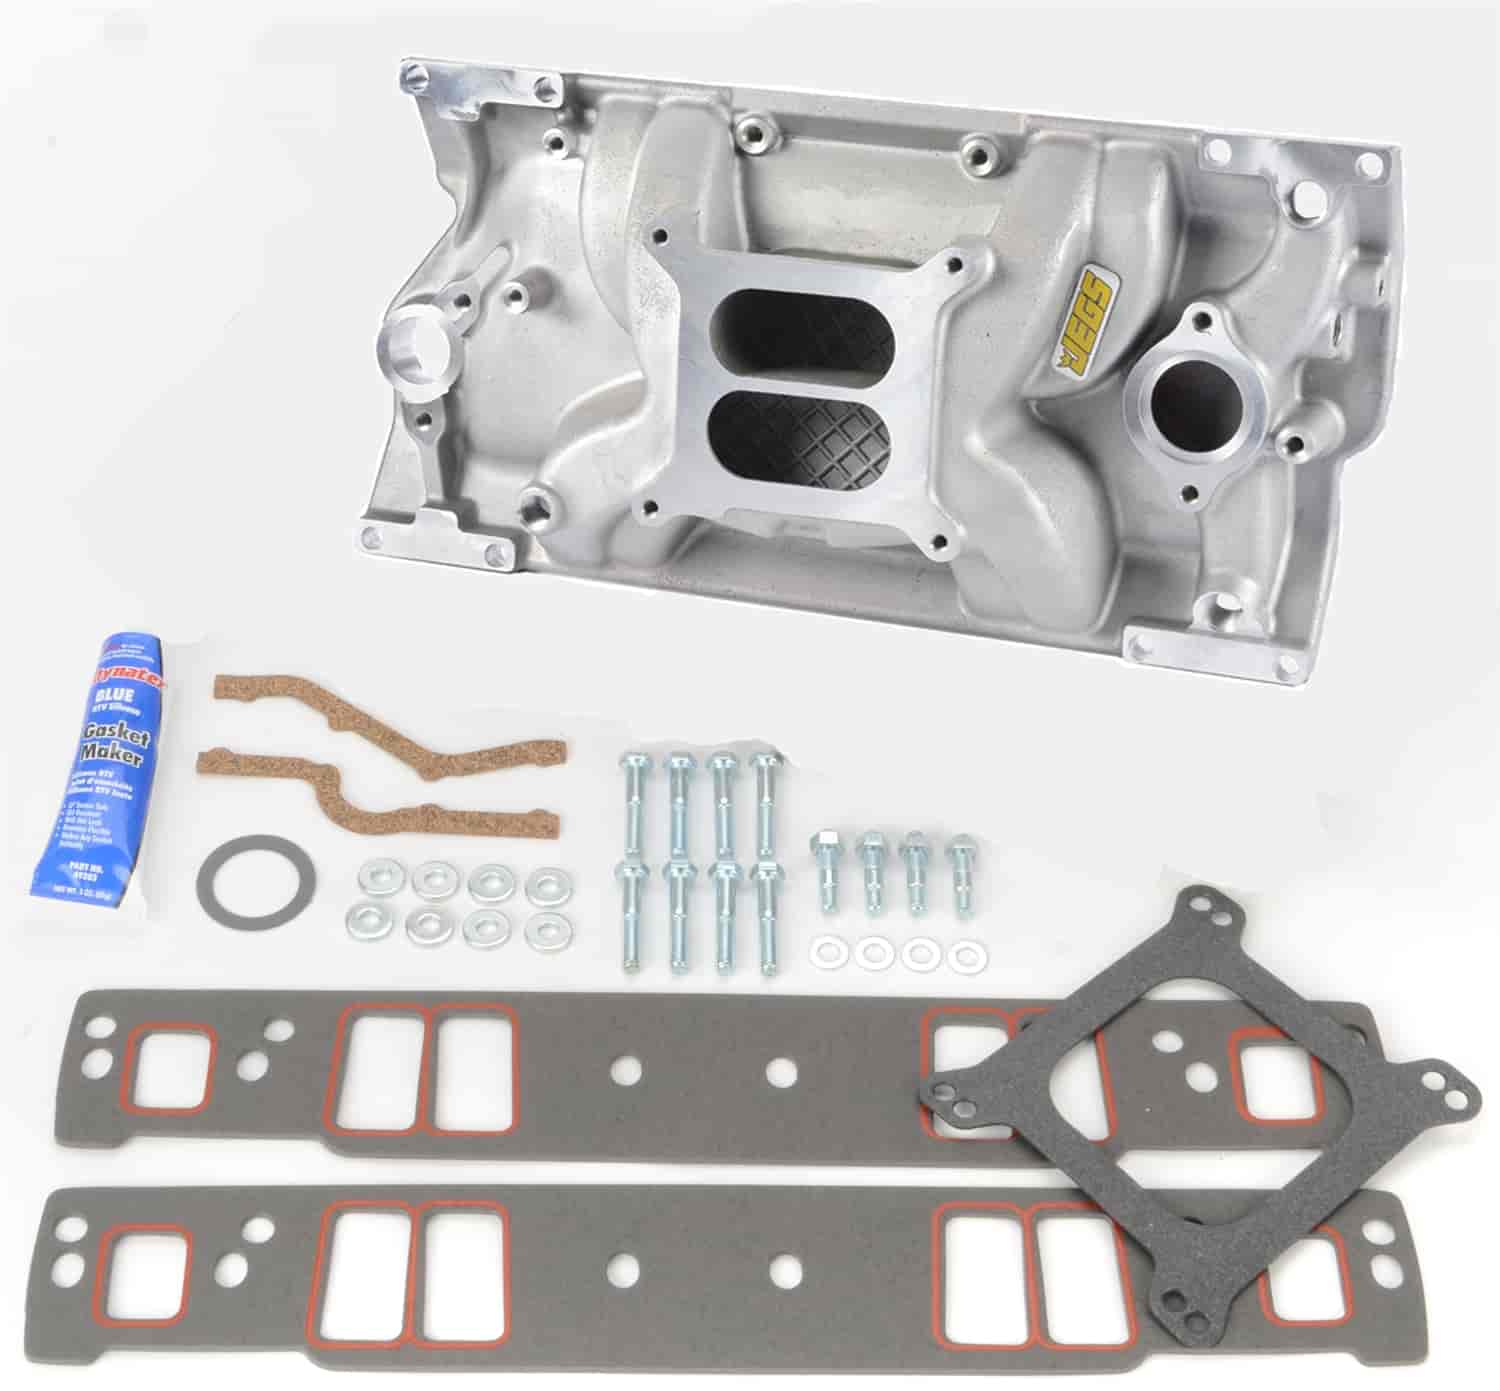 Intake Manifold with Installation Kit for 1996-2002 Small